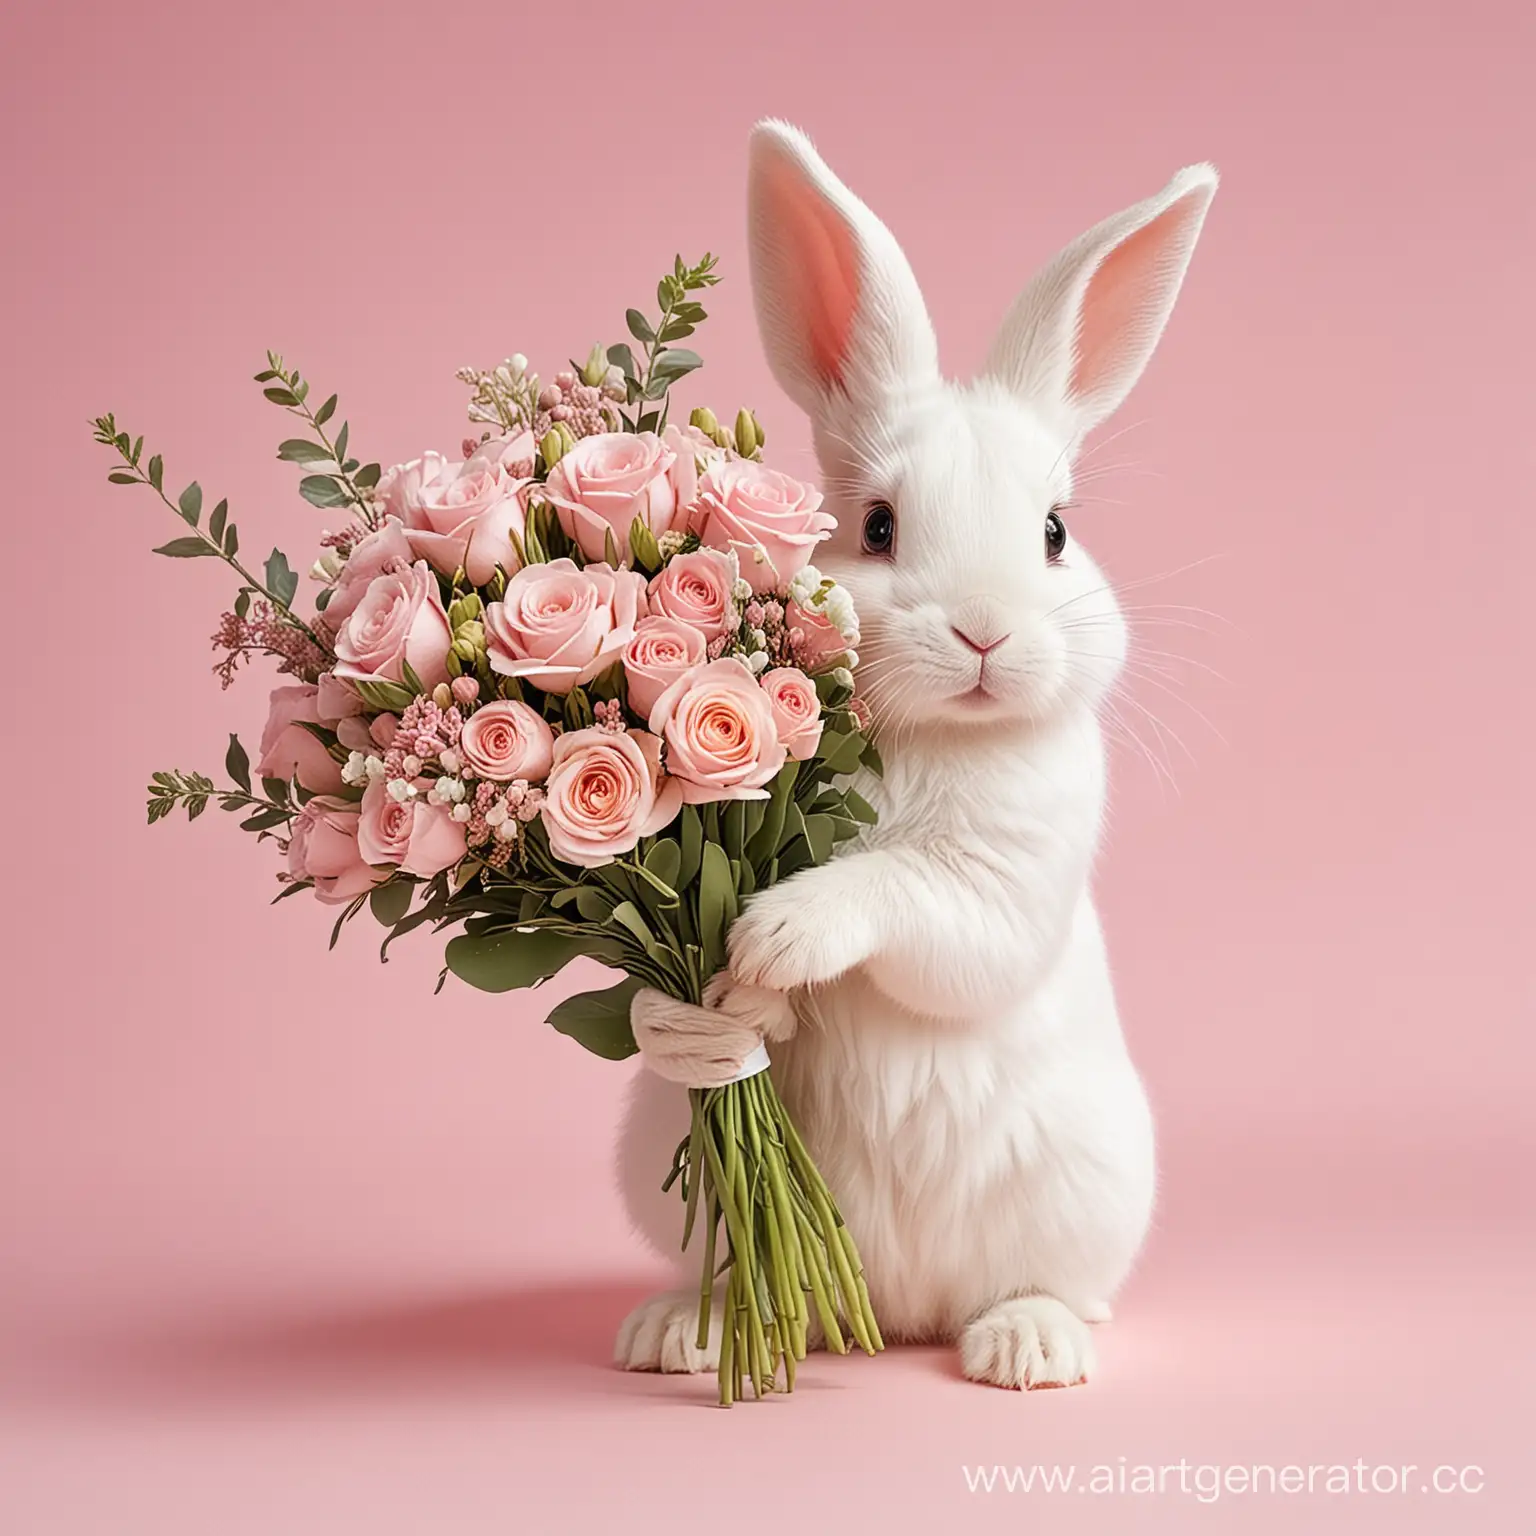 Adorable-White-Bunny-Holding-Bouquet-of-Flowers-on-Light-Pink-Background